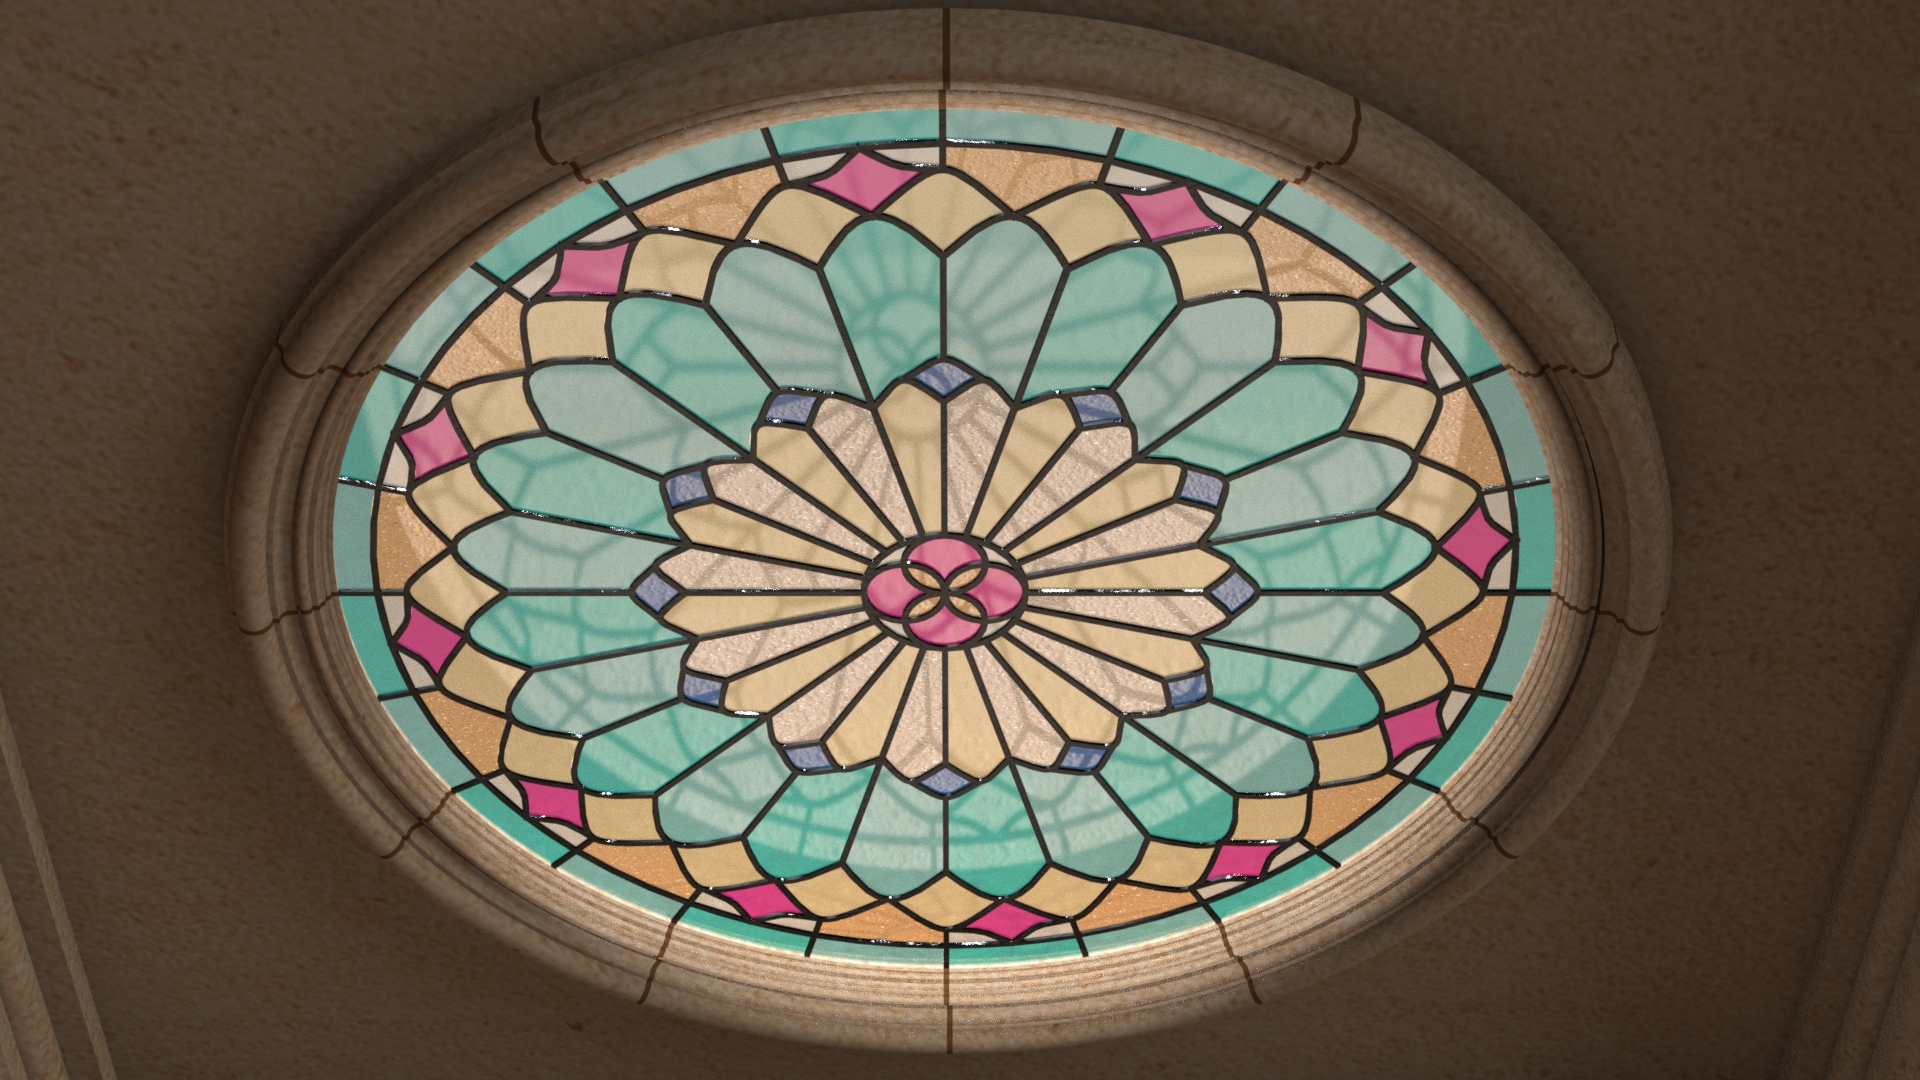 Stained Glass Window Tutorial